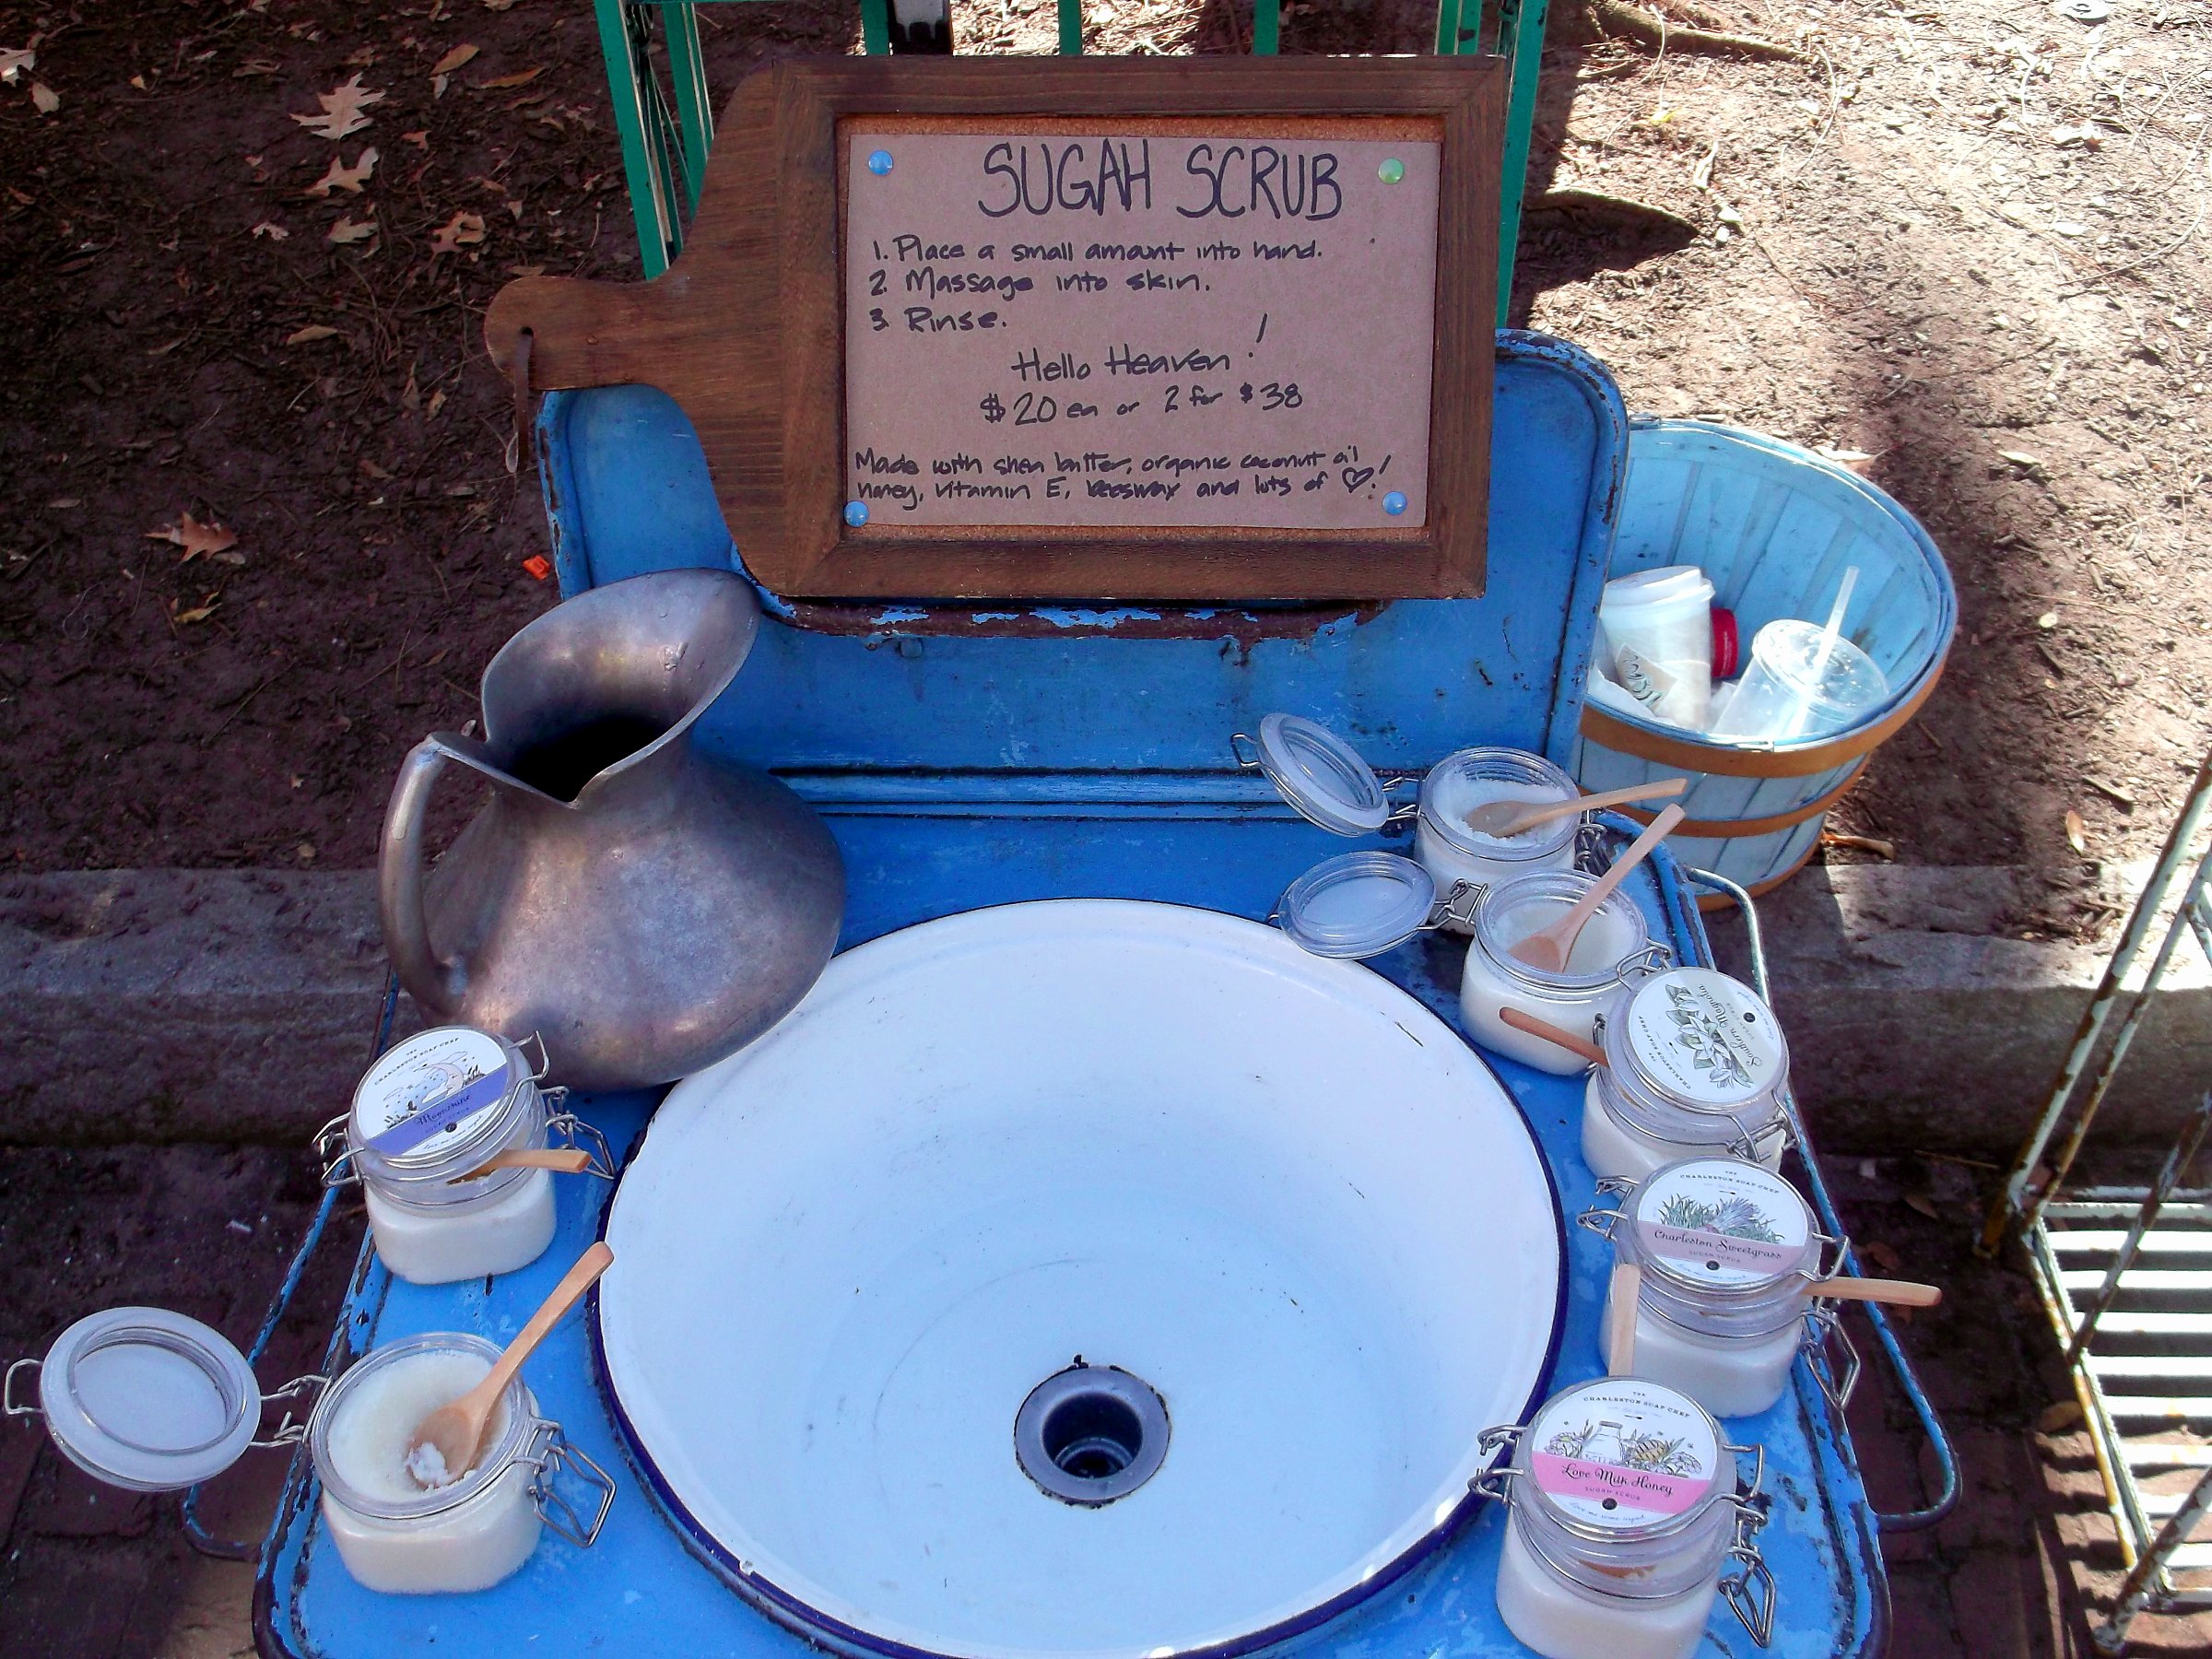 "Sugah Scrub", one of the many quirky local crafts you'll find at the farmers' market.